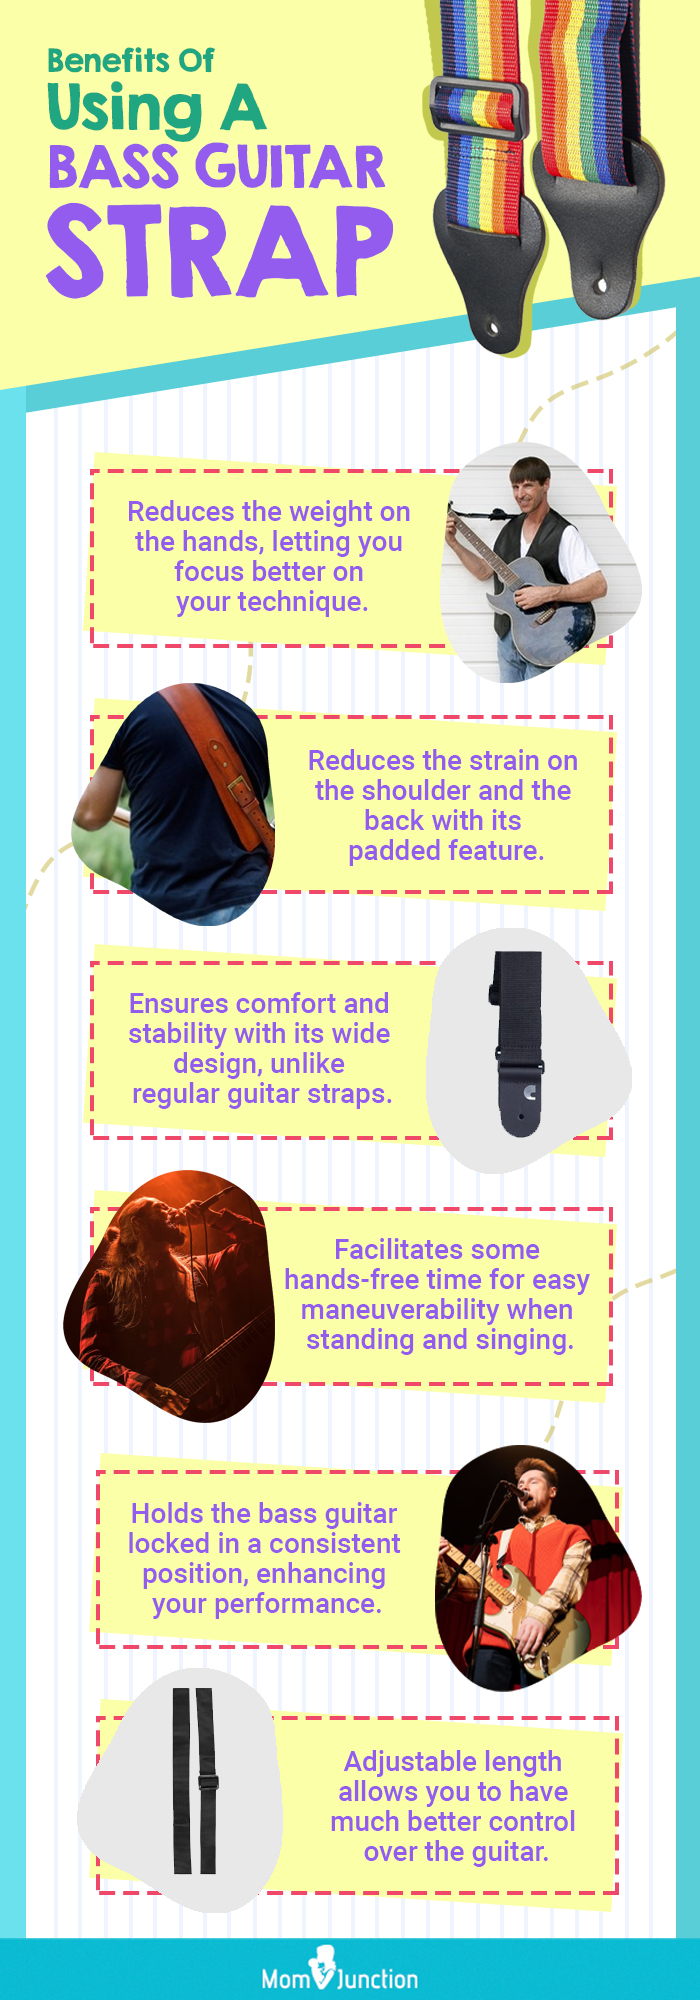 Benefits Of Using A Bass Guitar Strap (infographic)